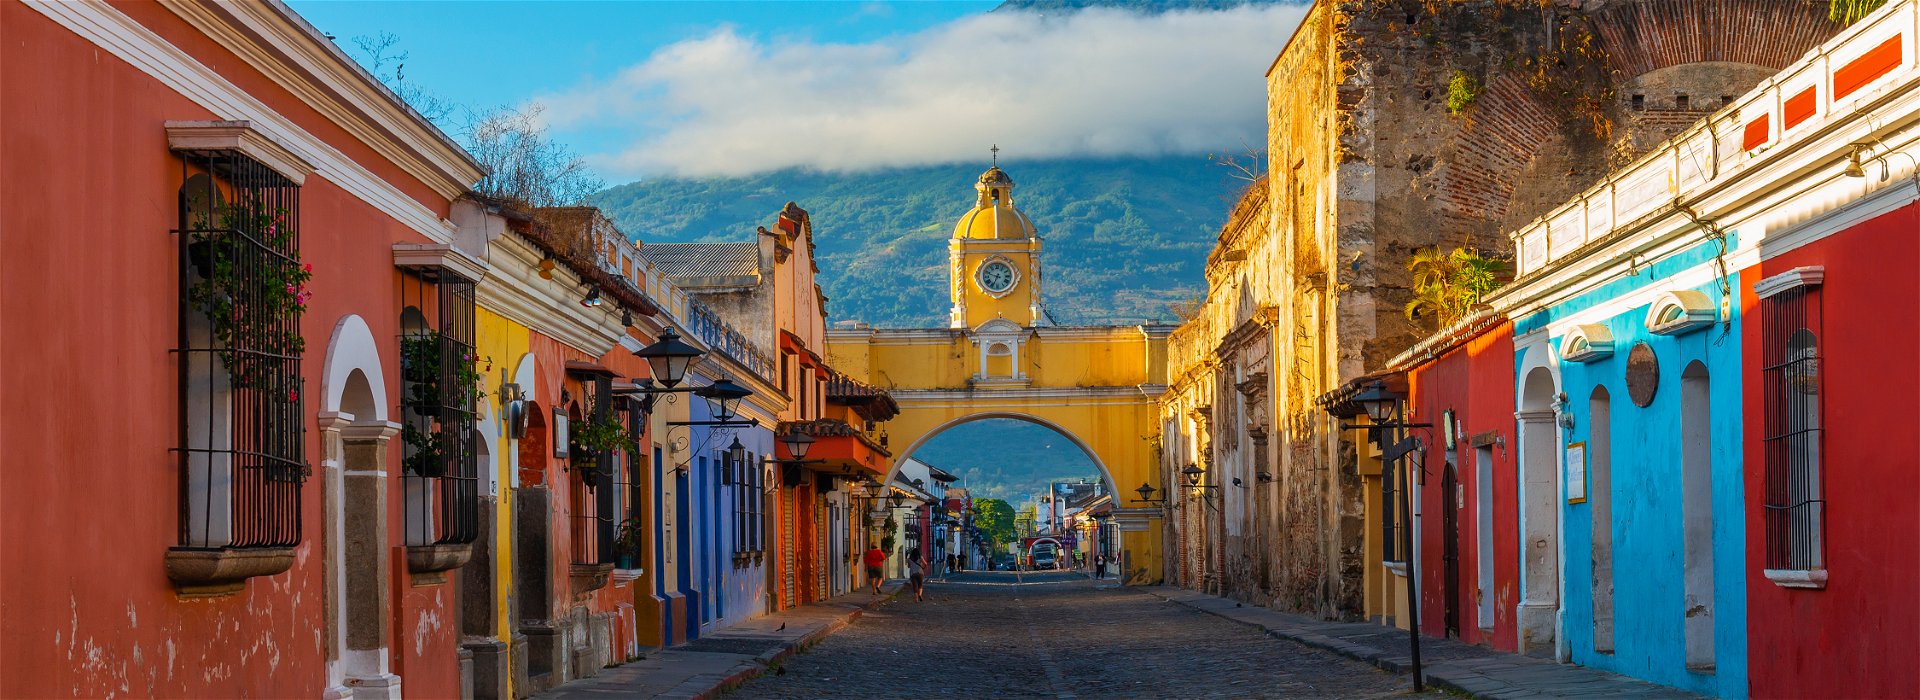 5 Reasons to Visit Central America